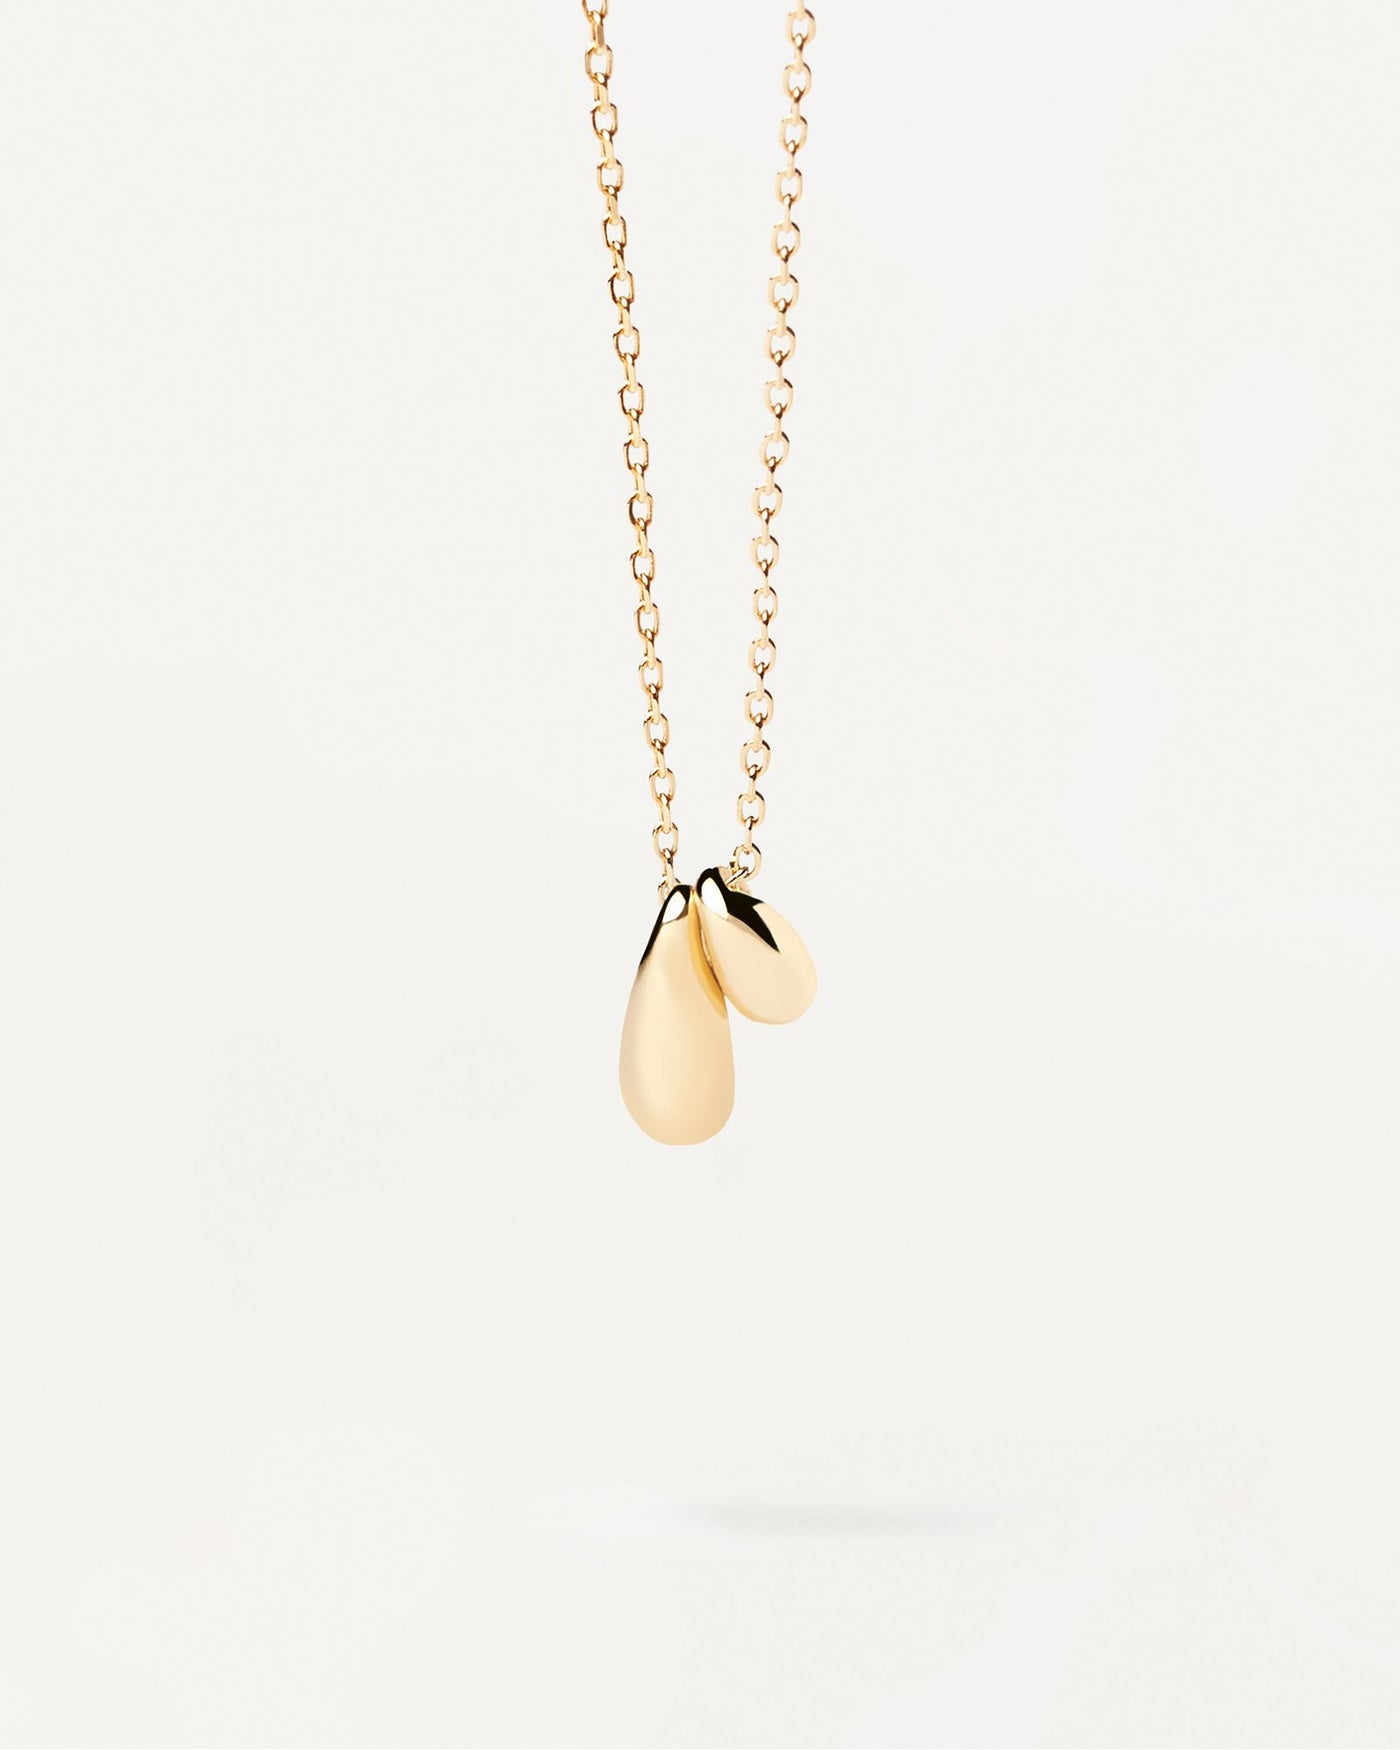 2024 Selection | Sugar Necklace. Gold-plated silver necklace with two drop pendants. Get the latest arrival from PDPAOLA. Place your order safely and get this Best Seller. Free Shipping.